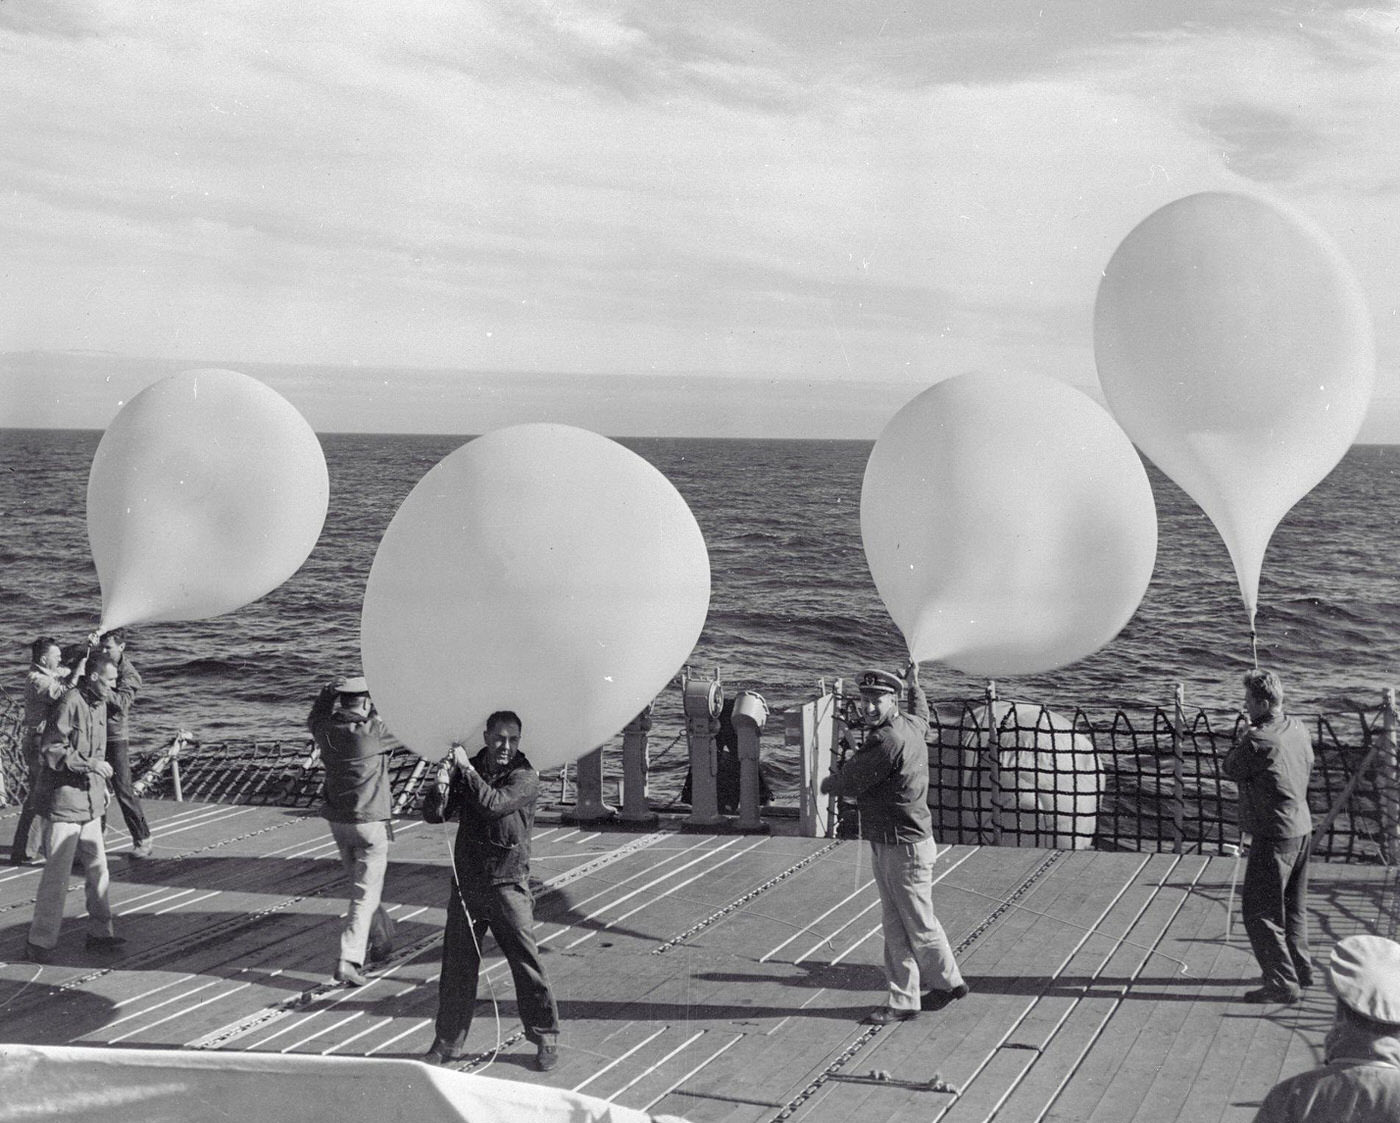 Naval Personnel Launch Balloons For Cosmic Radiation Tests Aboard The Icebreaker U.s.s. Staten Island.